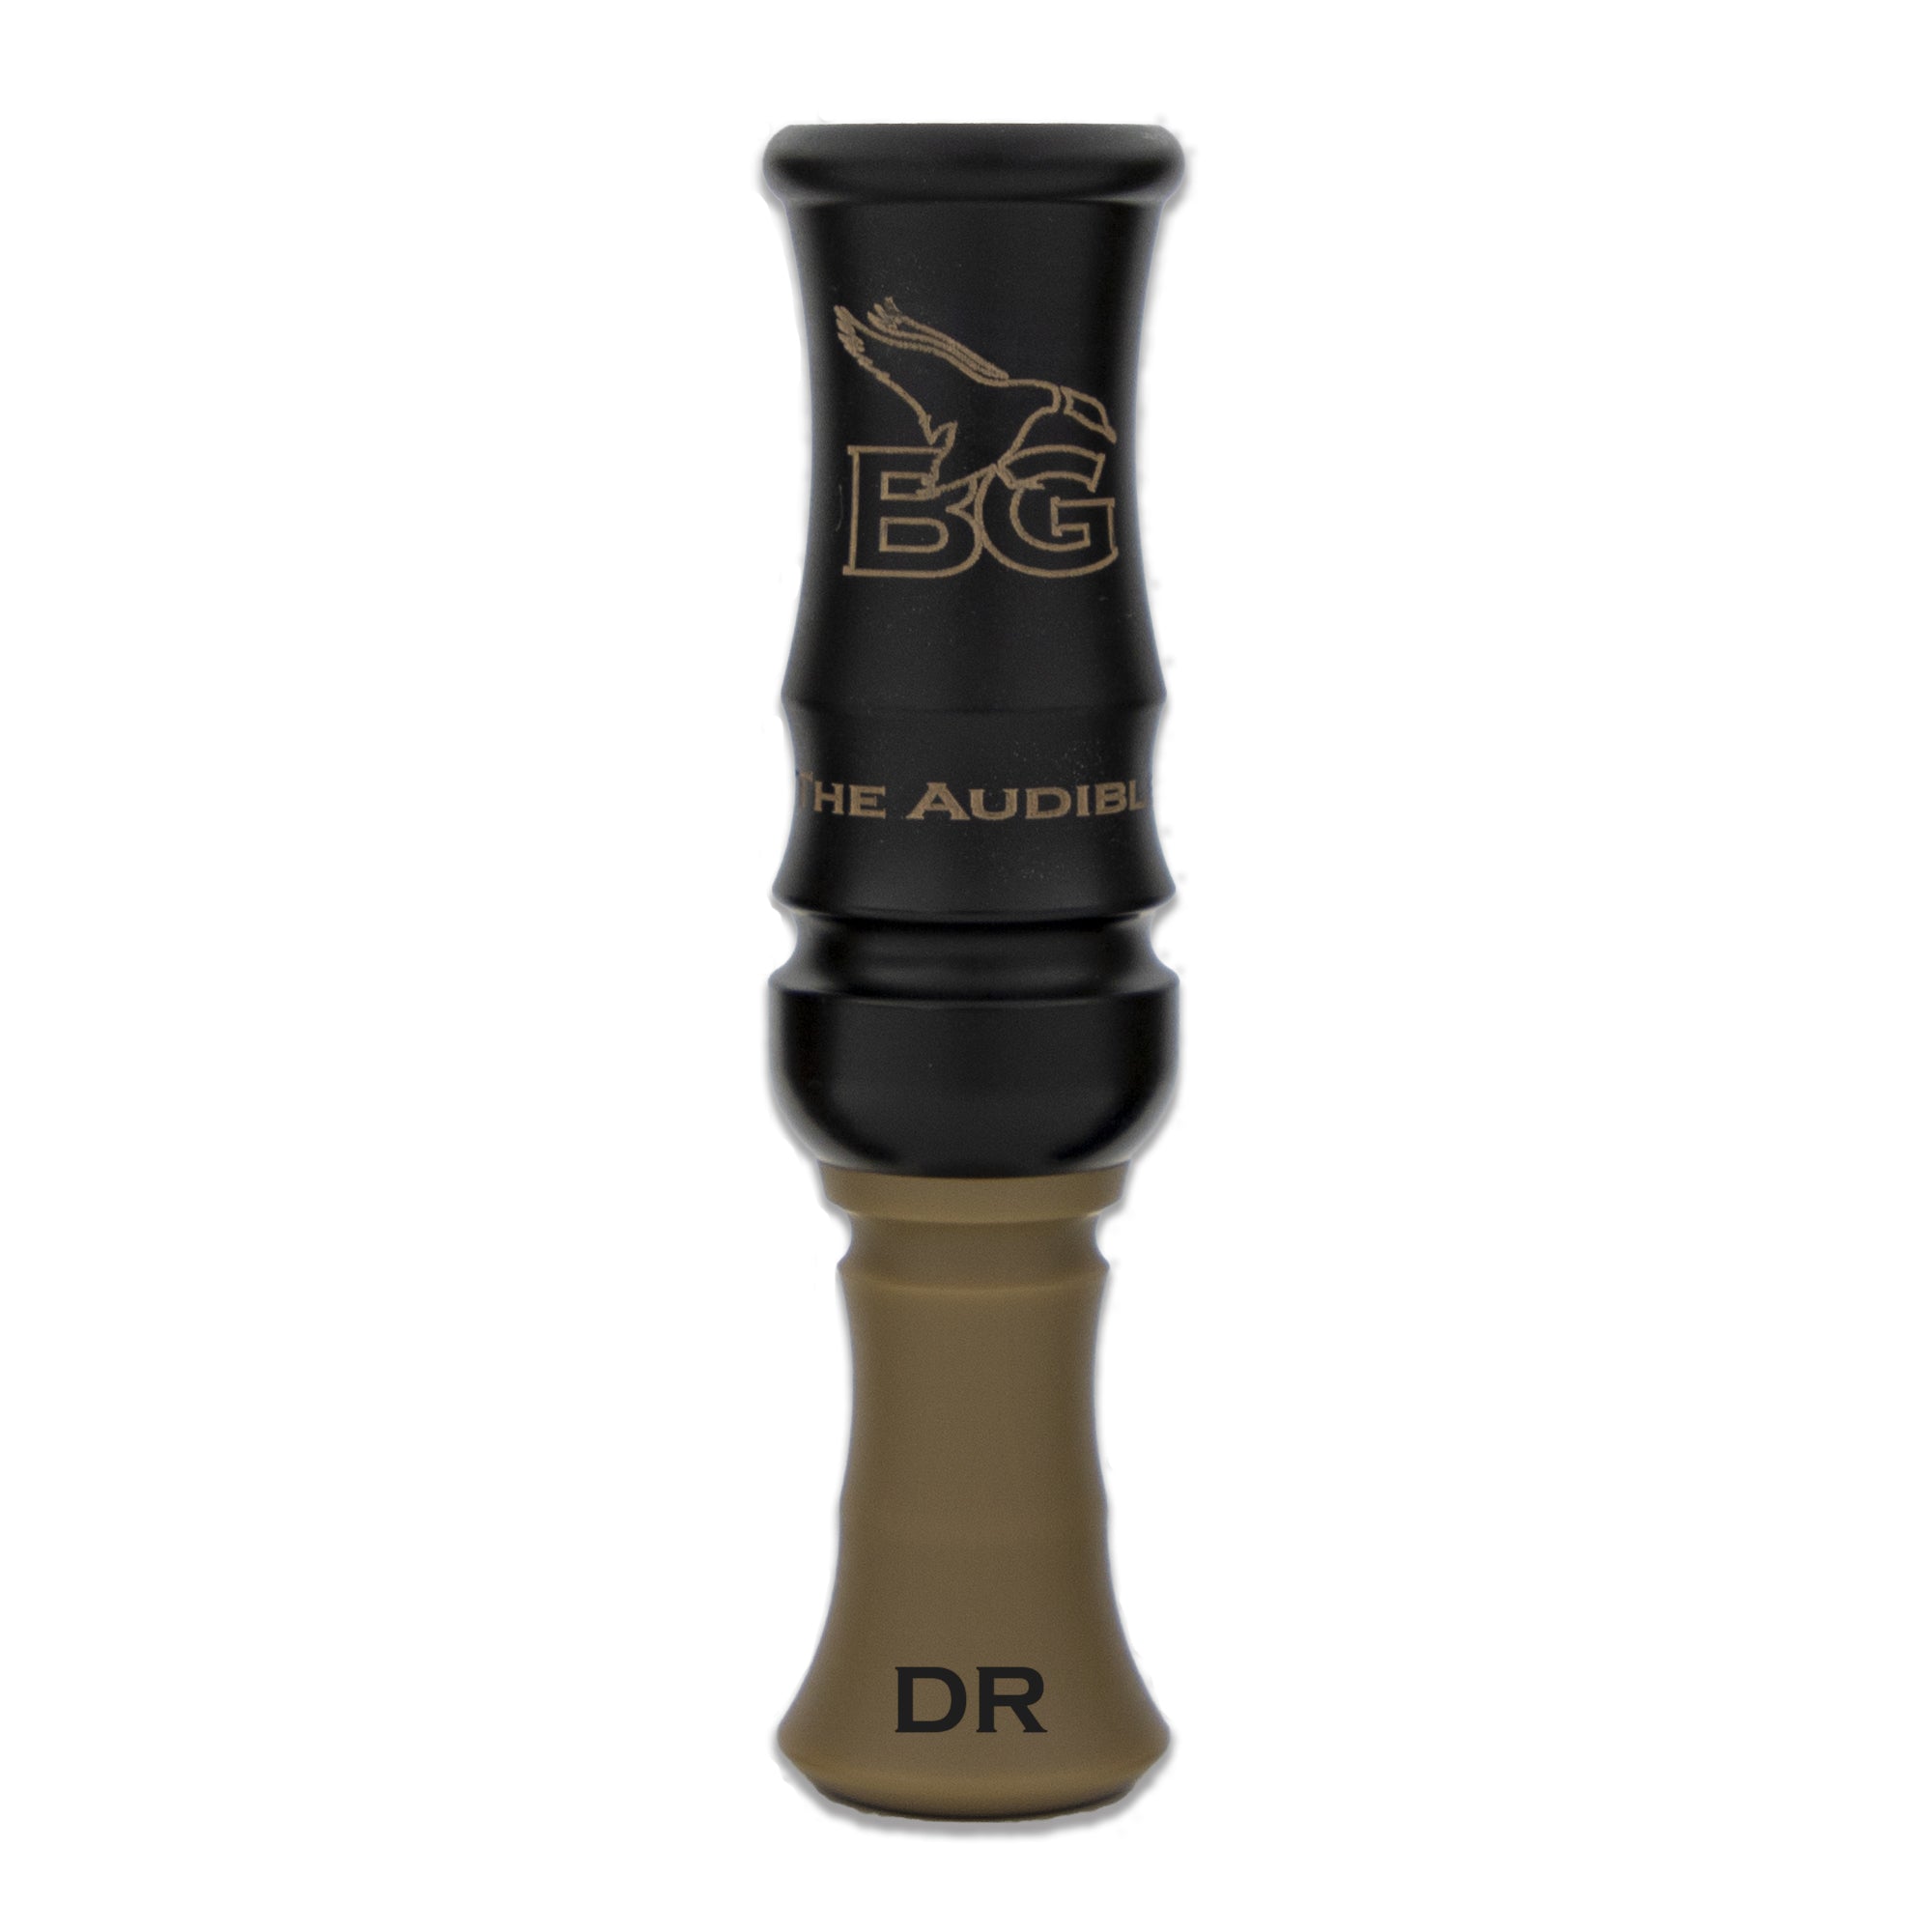 The Audible Double Reed Acrylic Duck Call